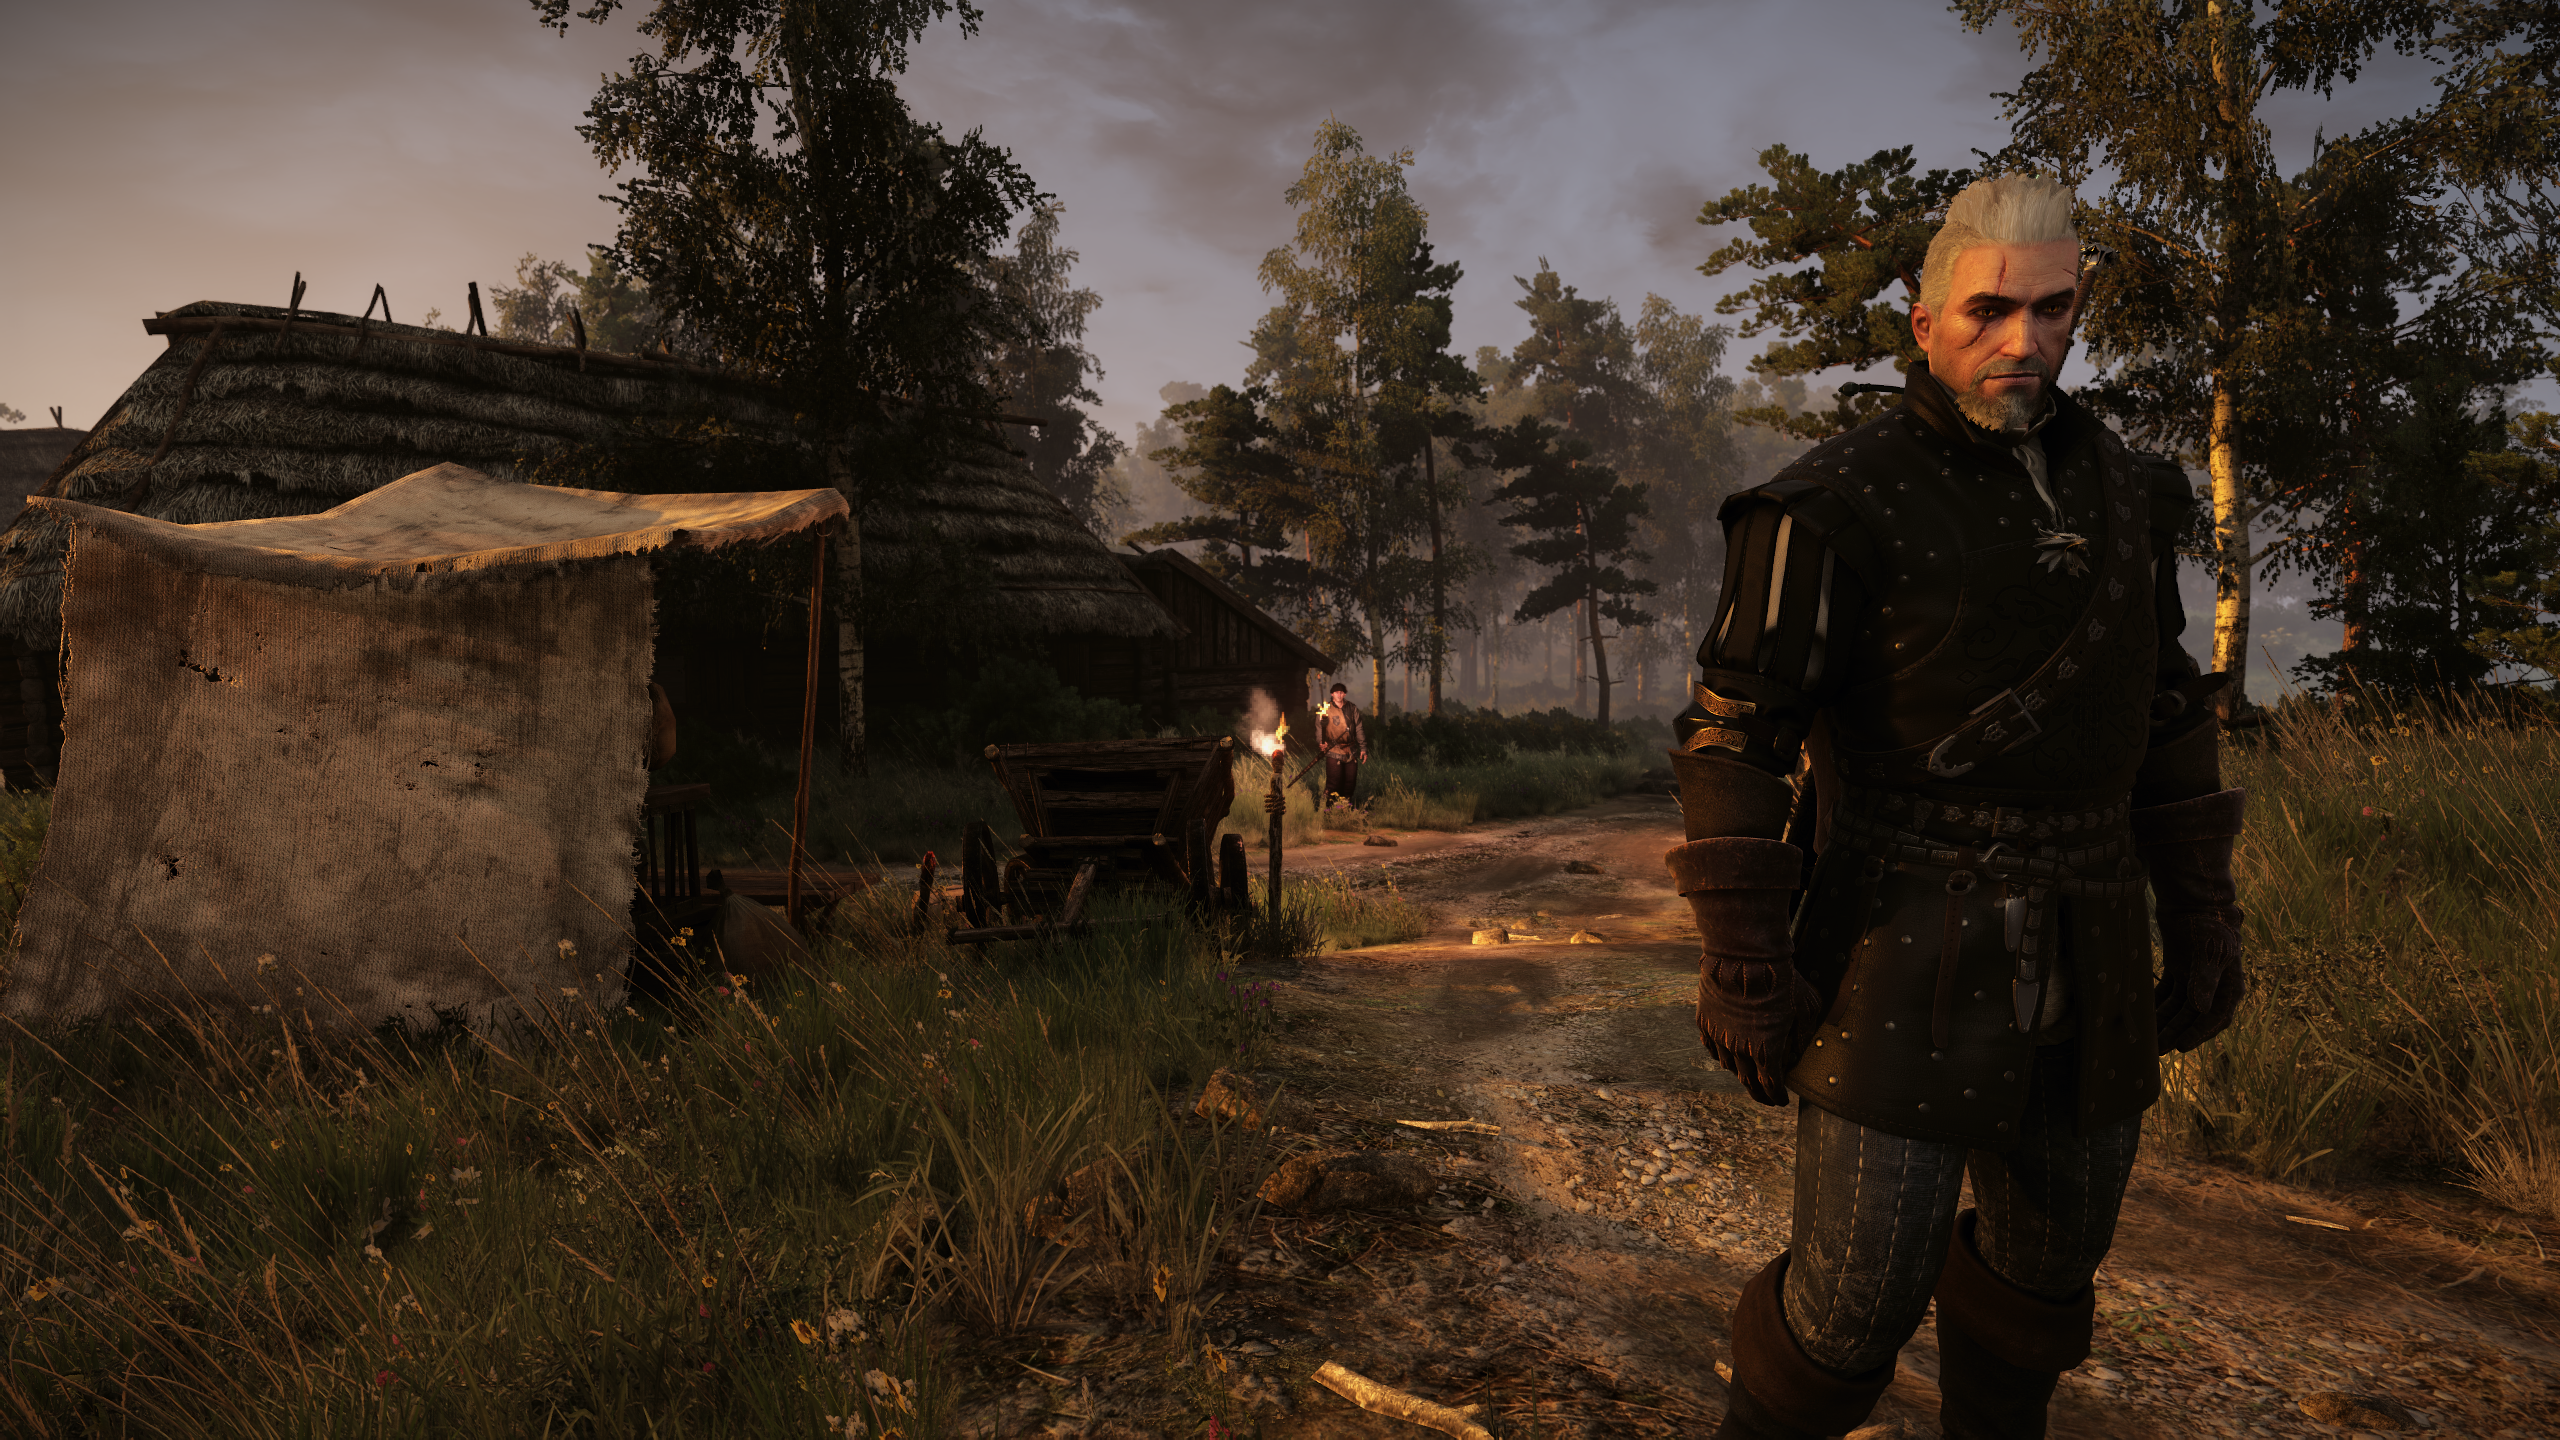 Video Games The Witcher 3 Geralt Of Rivia Beard Video Game Characters CGi Video Game Art Screen Shot 2560x1440